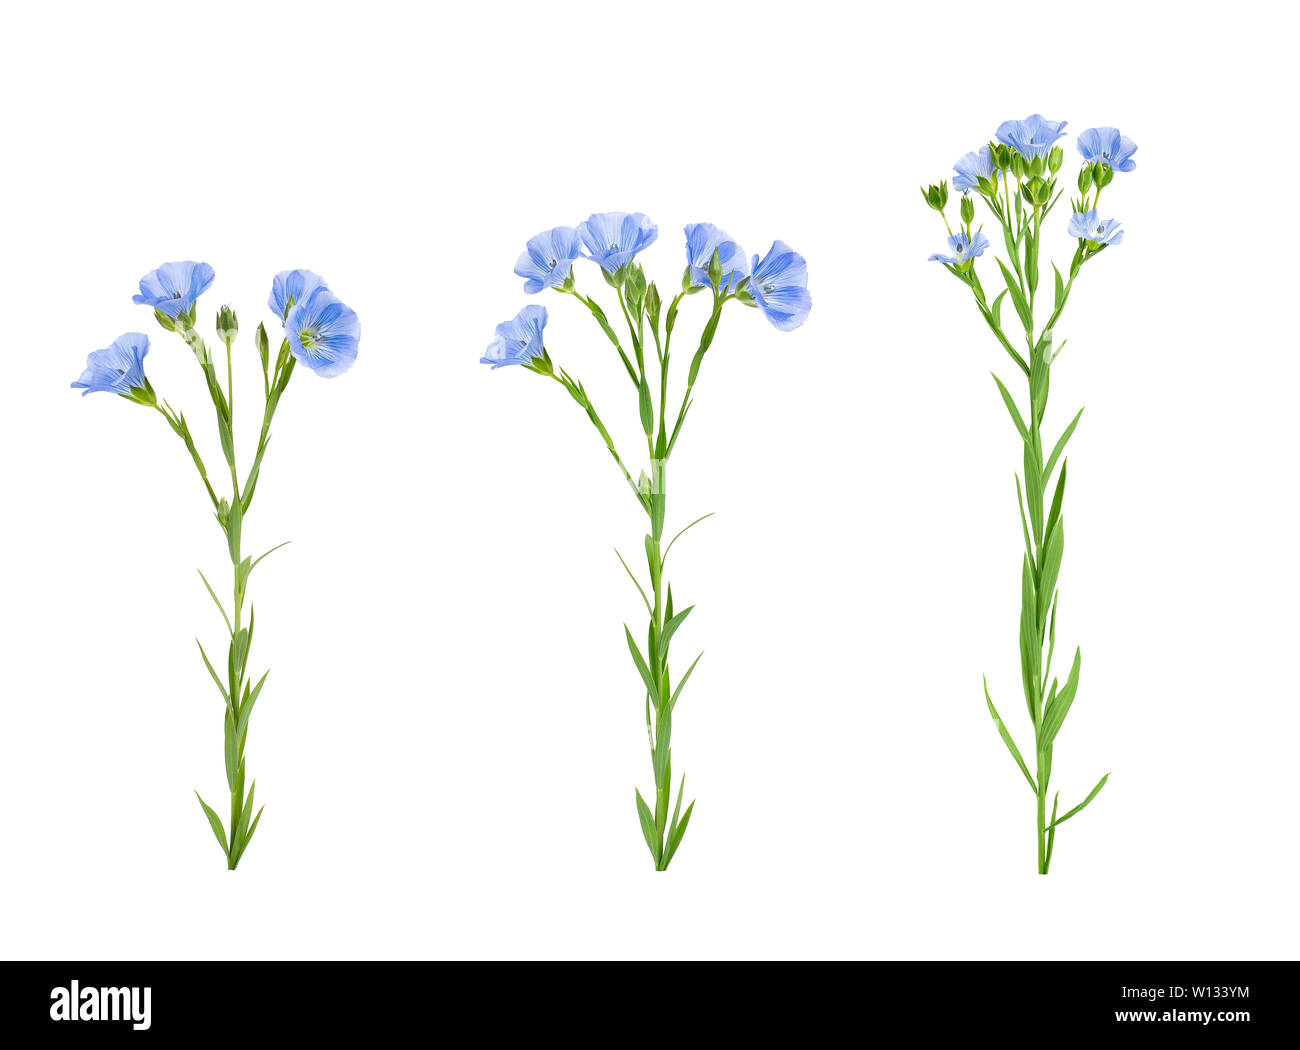 collection of blue flax flowers isolated on white background Stock Photo